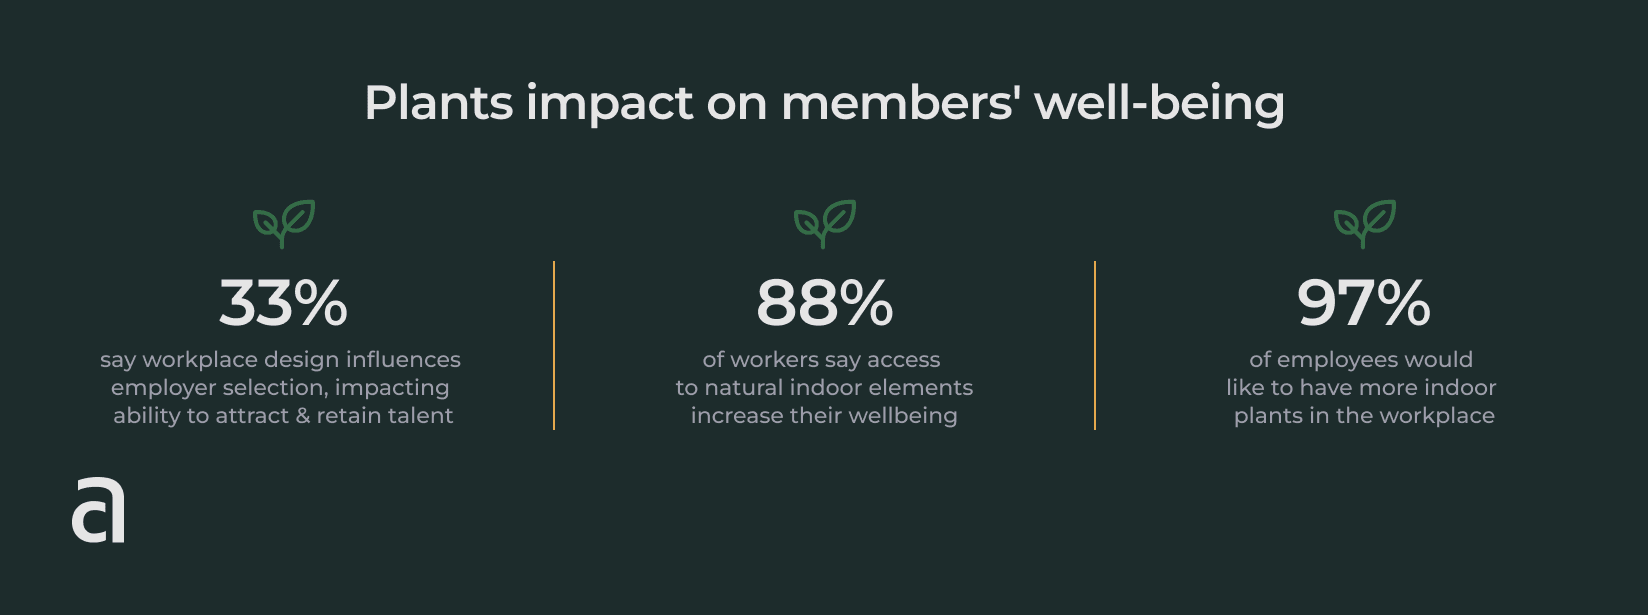 Plants impact on members' well-being